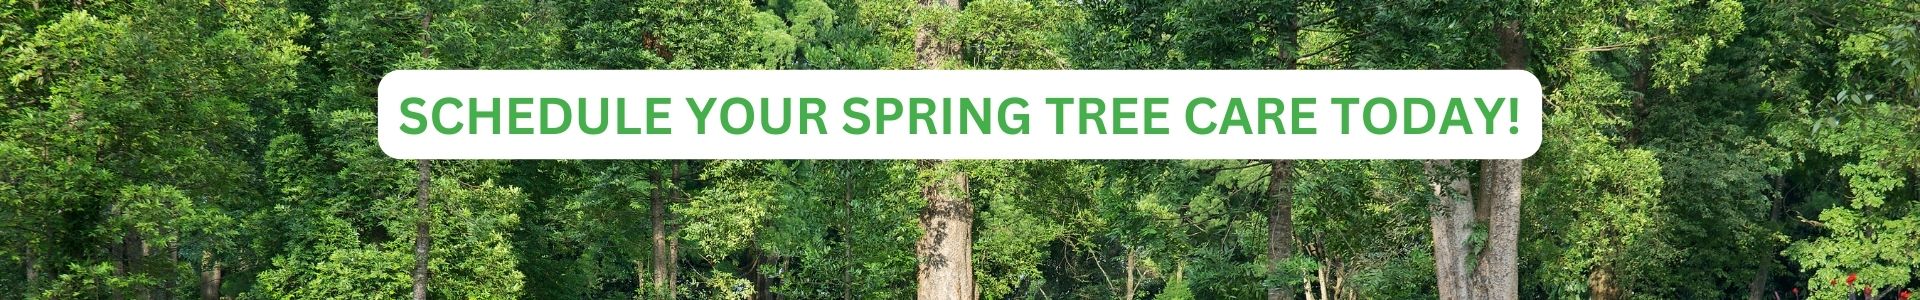 Spring Tree Care from Timber Ridge Tree Service